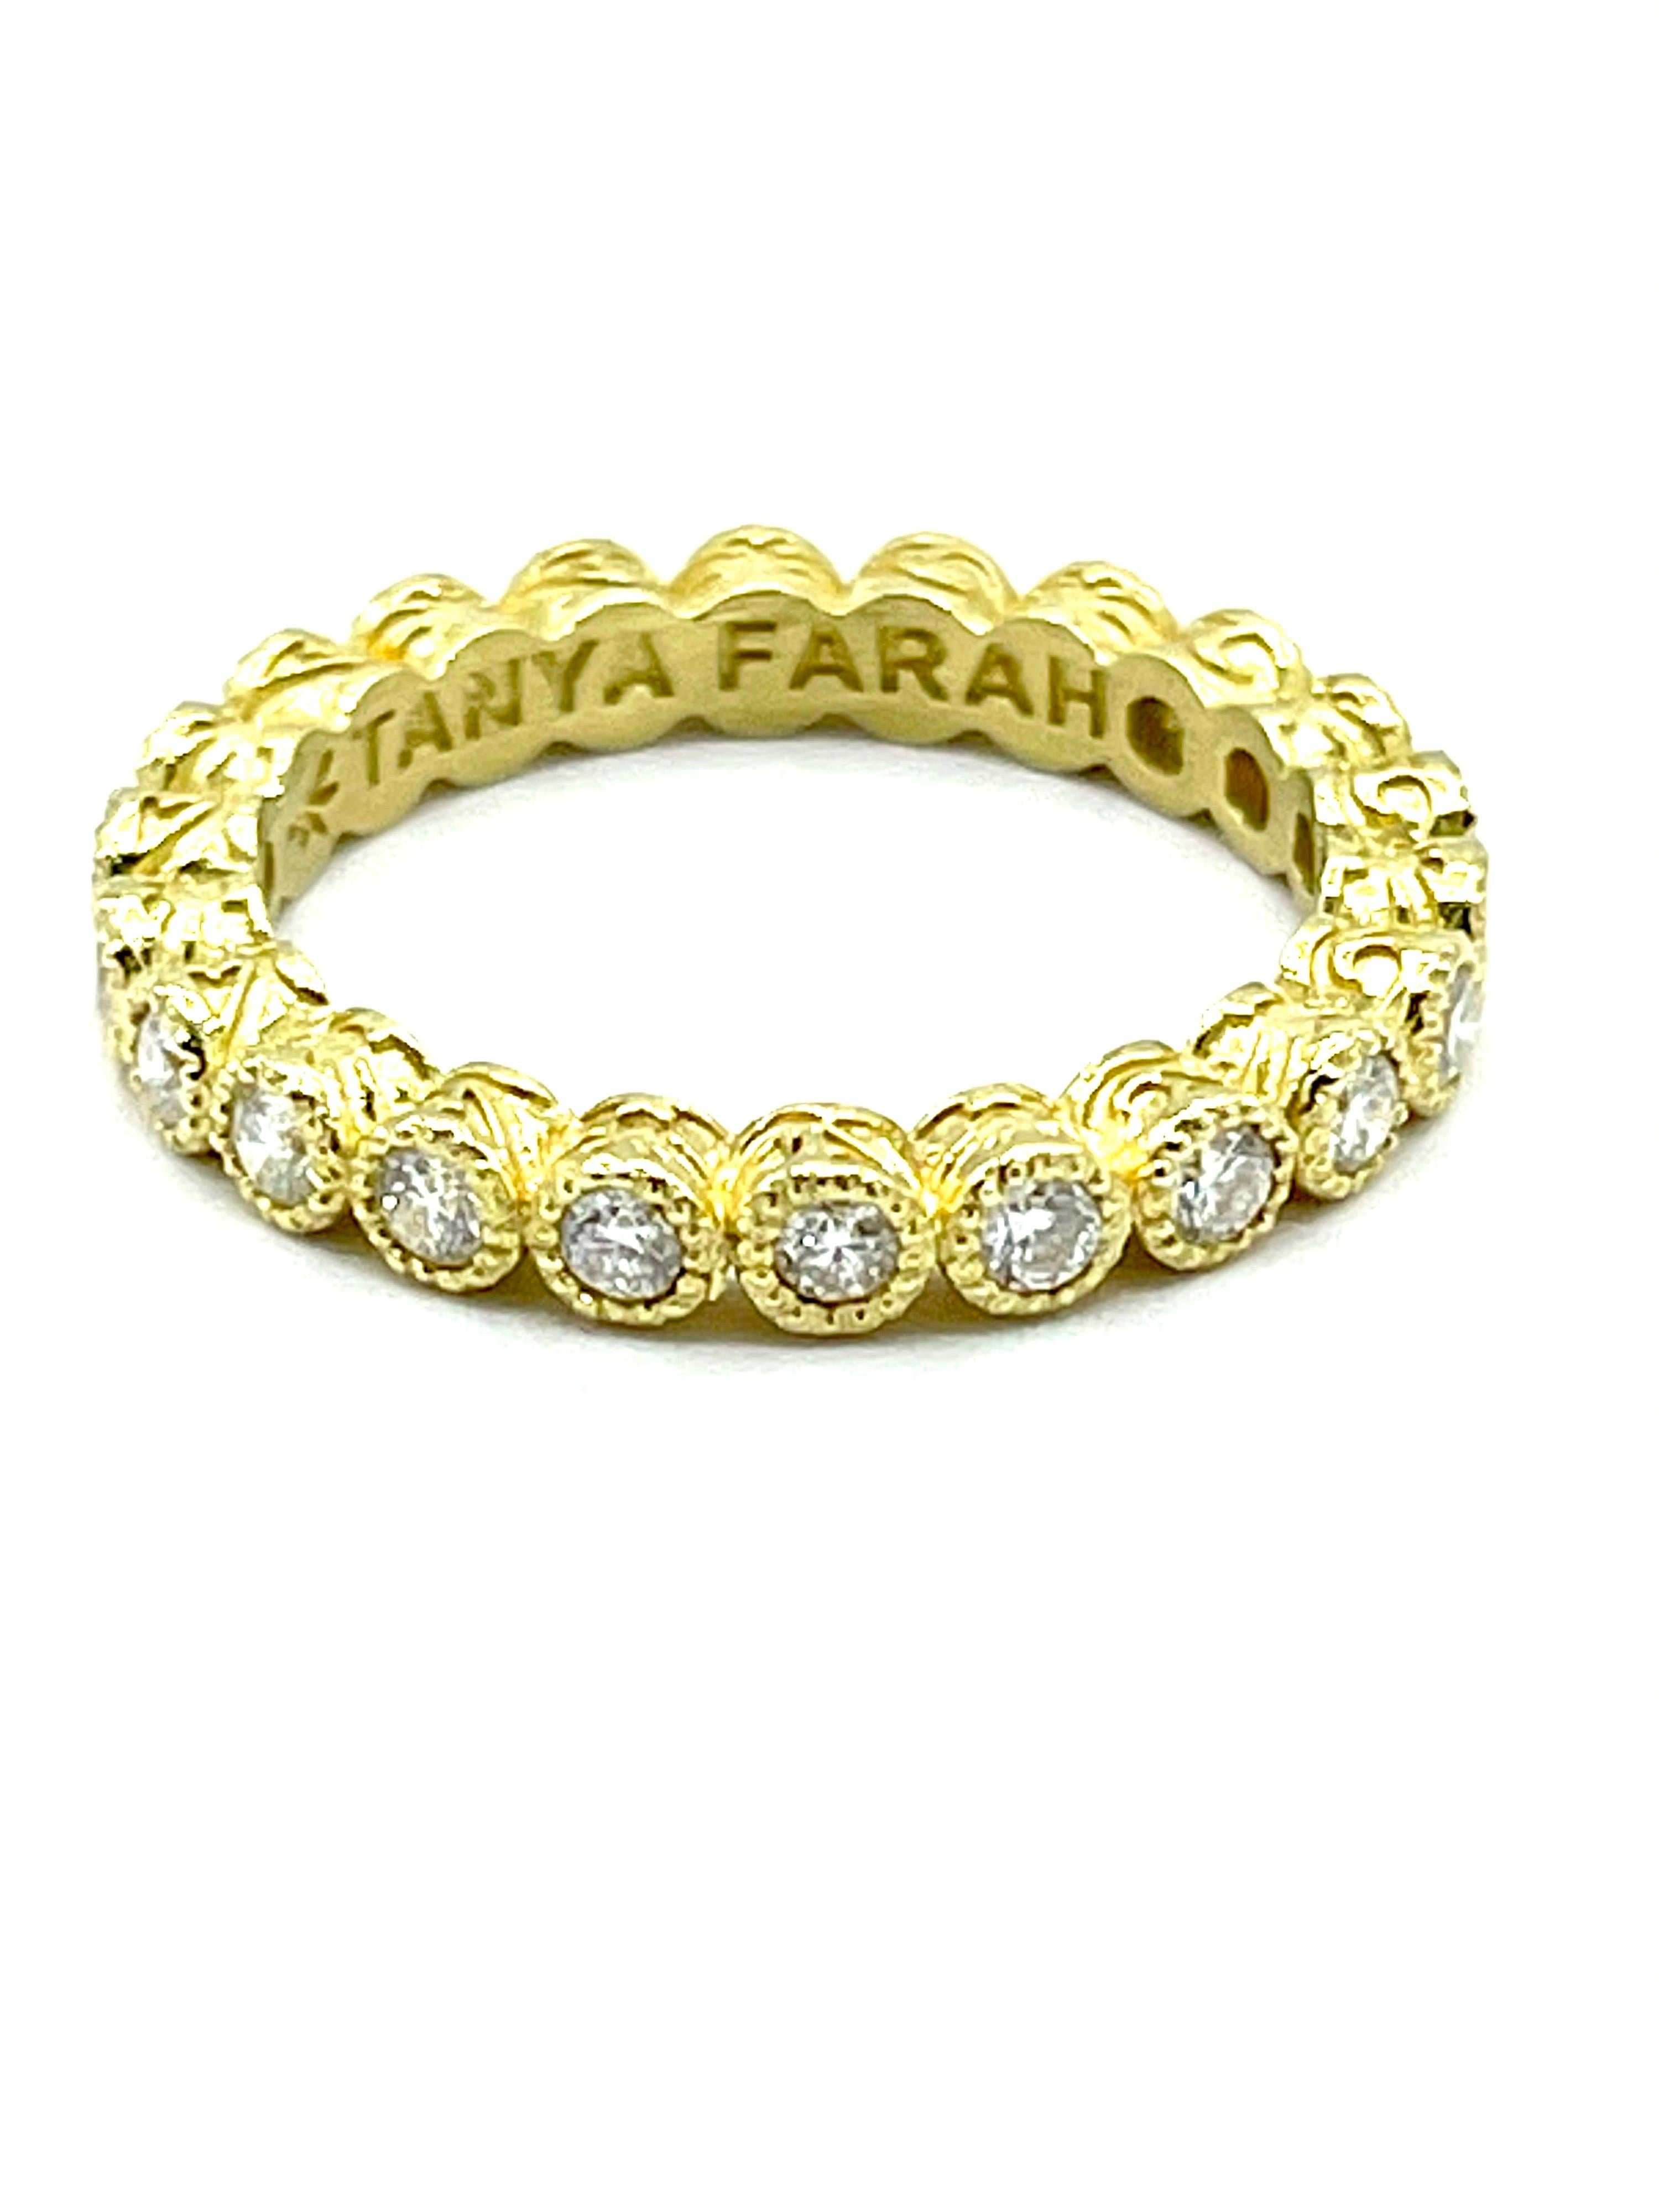 Tanya Farah 0.65 Carat Bezel Set 18 Karat Yellow Gold Diamond Eternity Ring In Excellent Condition In Chevy Chase, MD